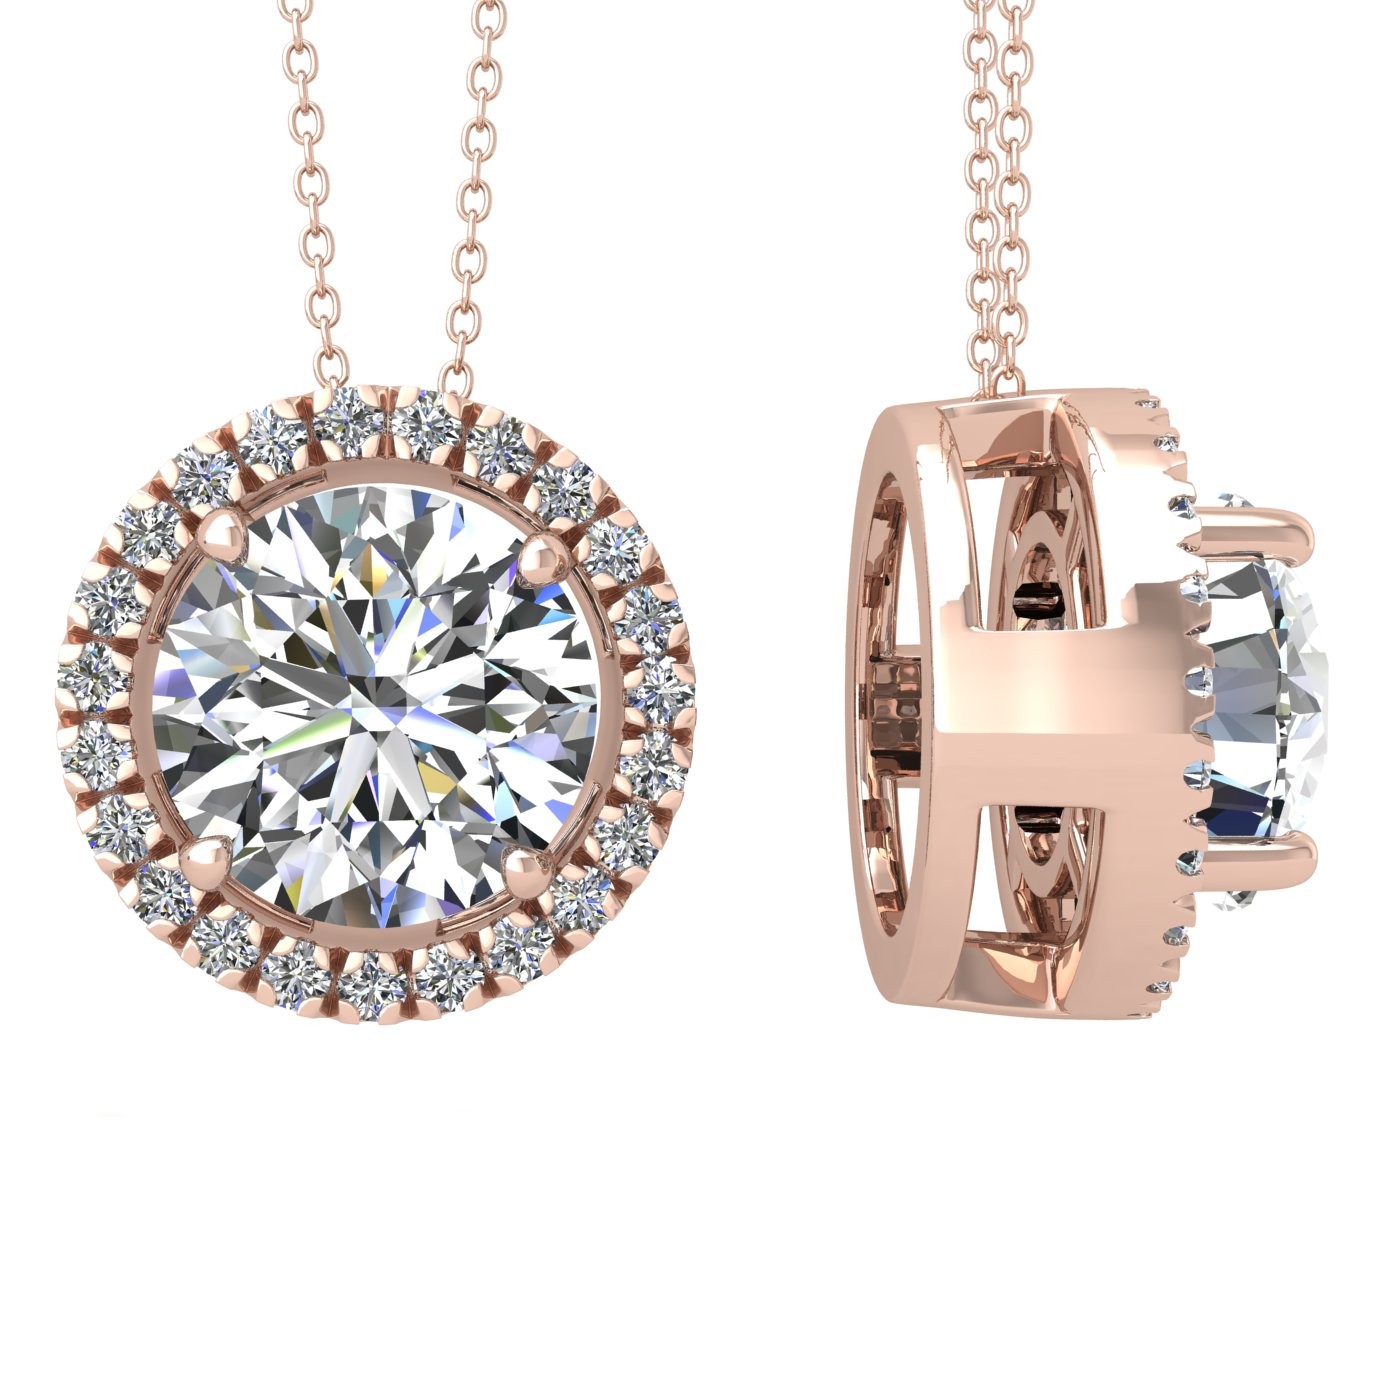 18k rose gold 0,3 ct 4 prong round shape diamond pendant with diamond pavÉ set halo including chain seperate from the pendant Photos & images